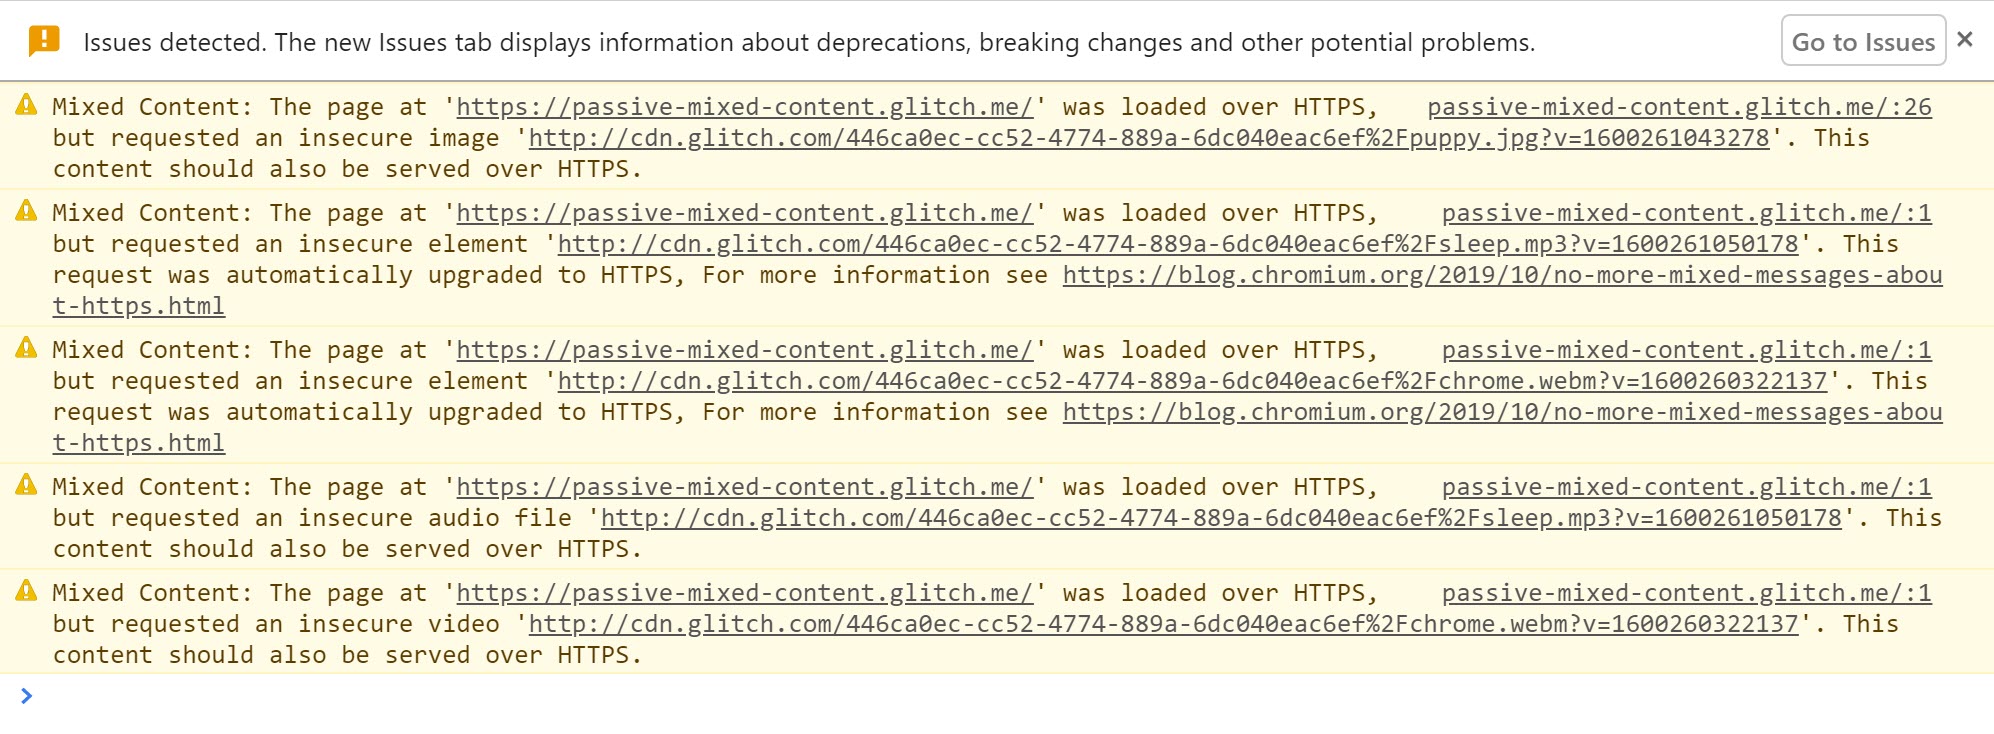 Chrome DevTools showing the warnings displayed when mixed content is detected and upgraded